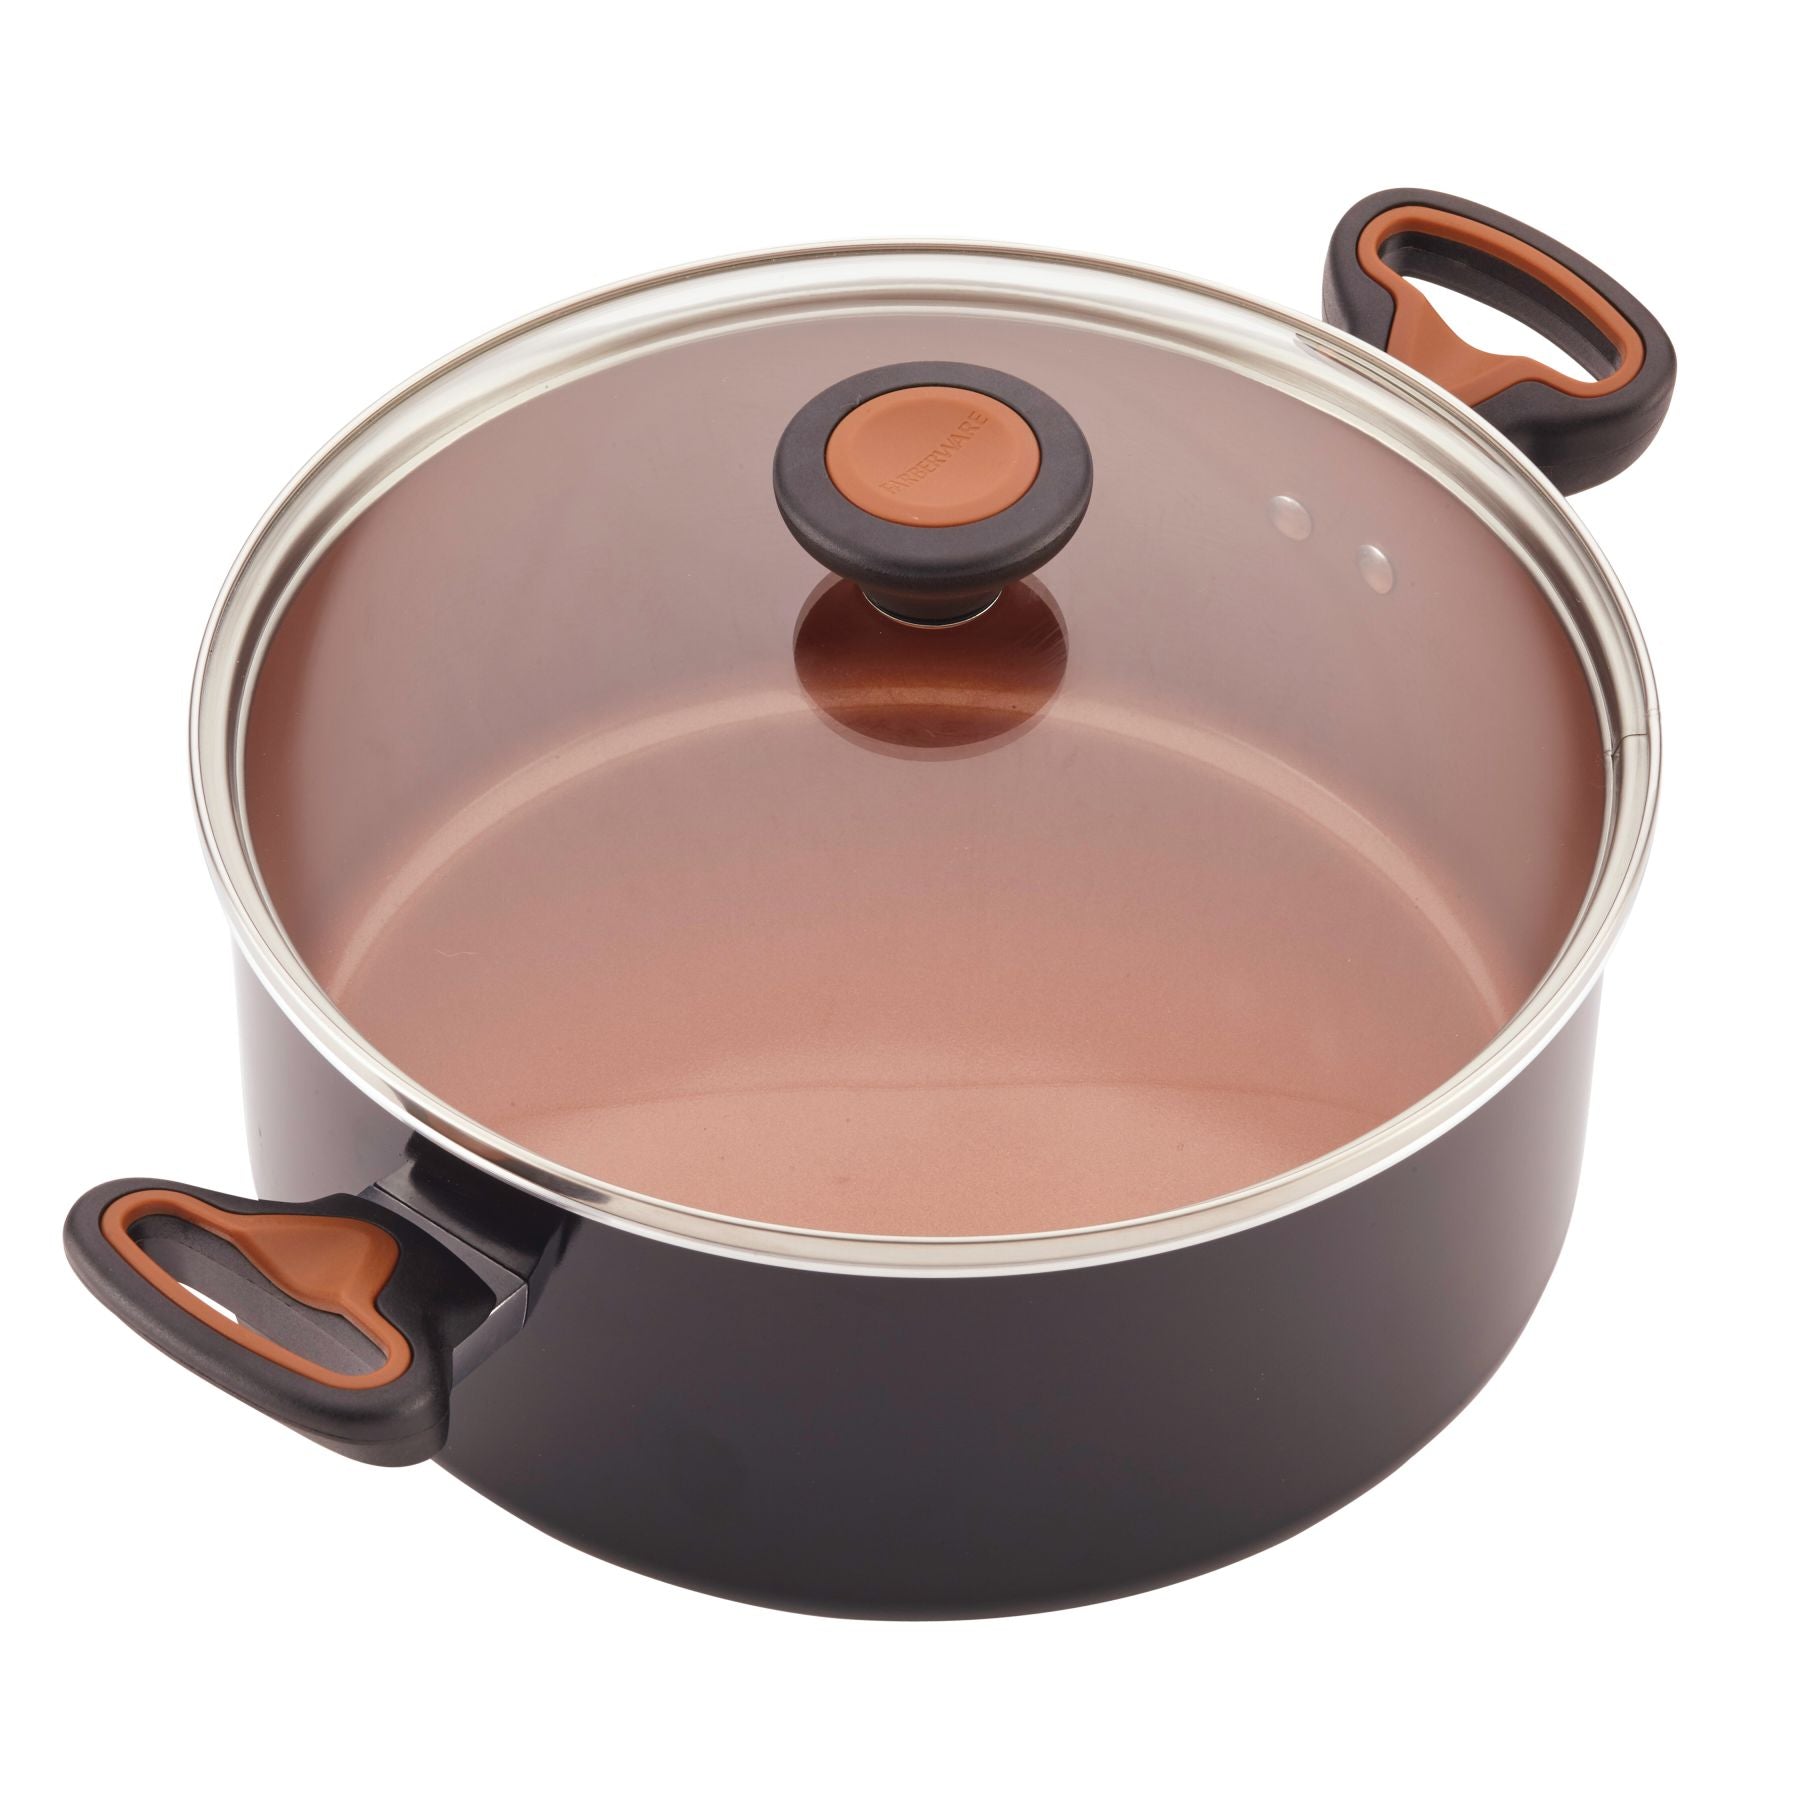 The Our Place Pan - The Best Non-Stick Pan Ever - Cristin Cooper